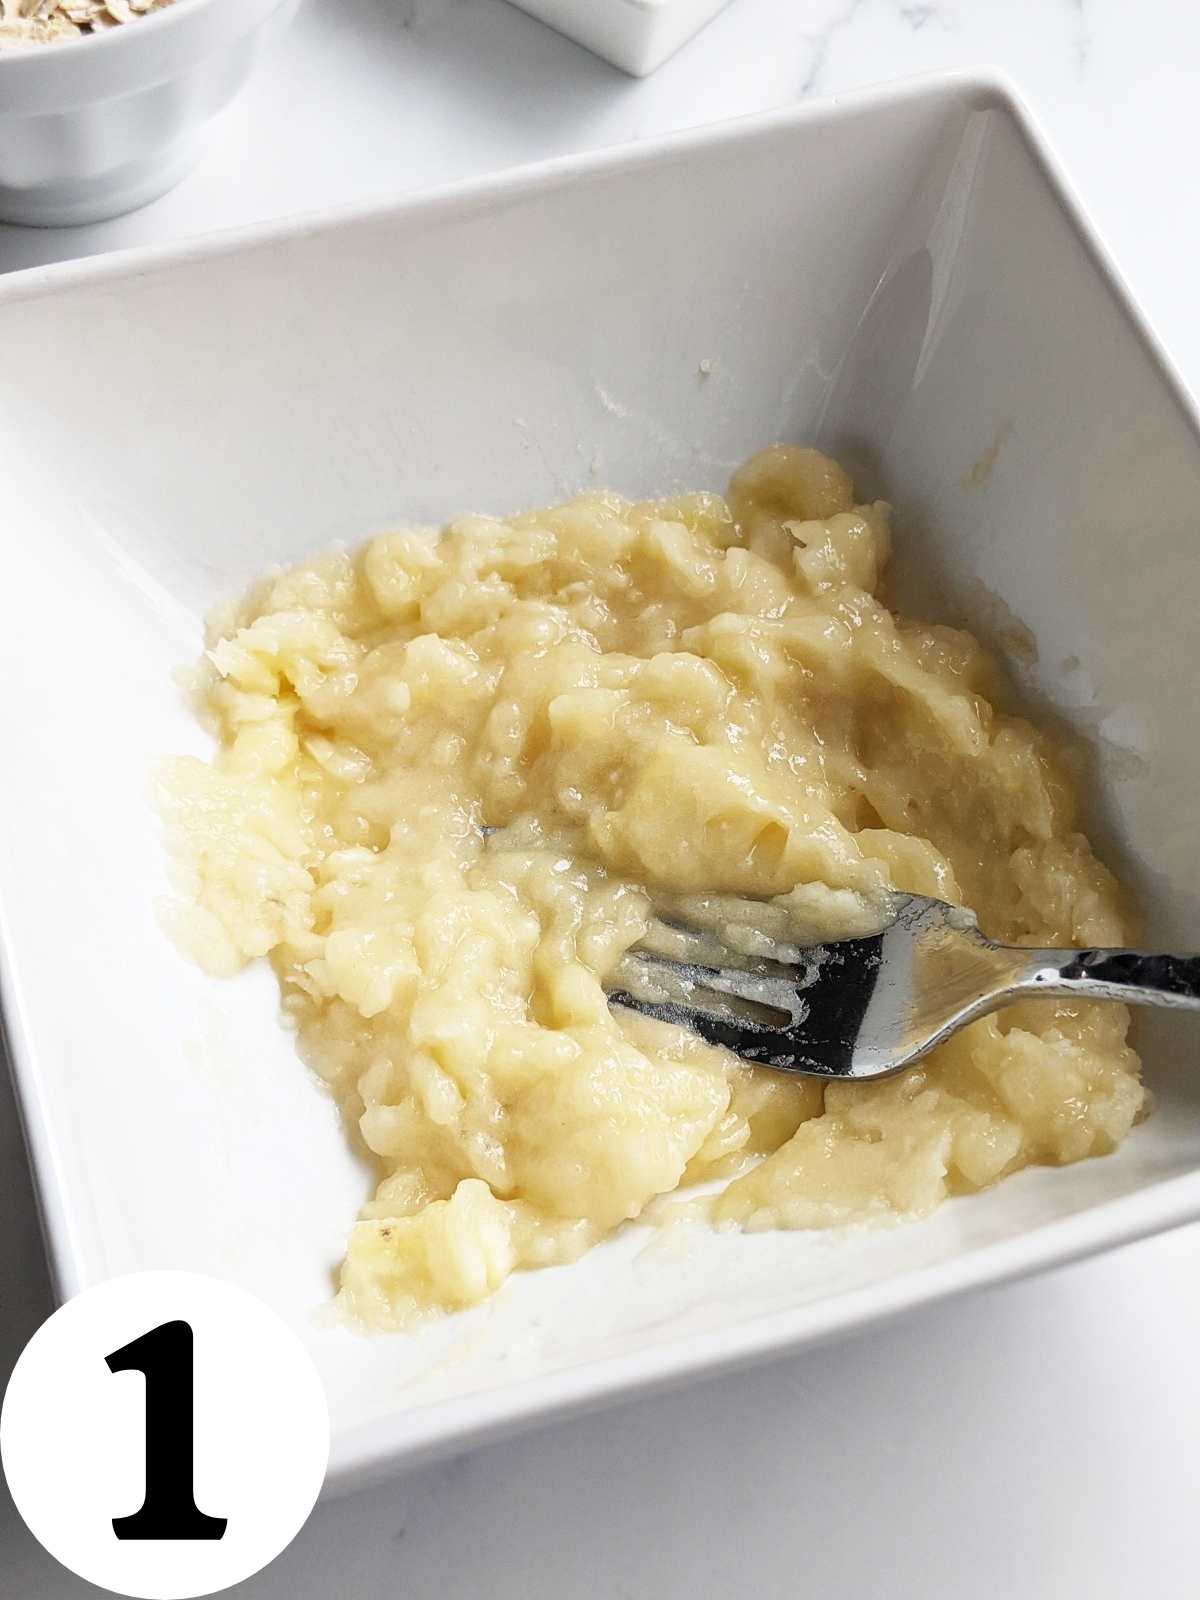 Banana mashed with a fork in a bowl.